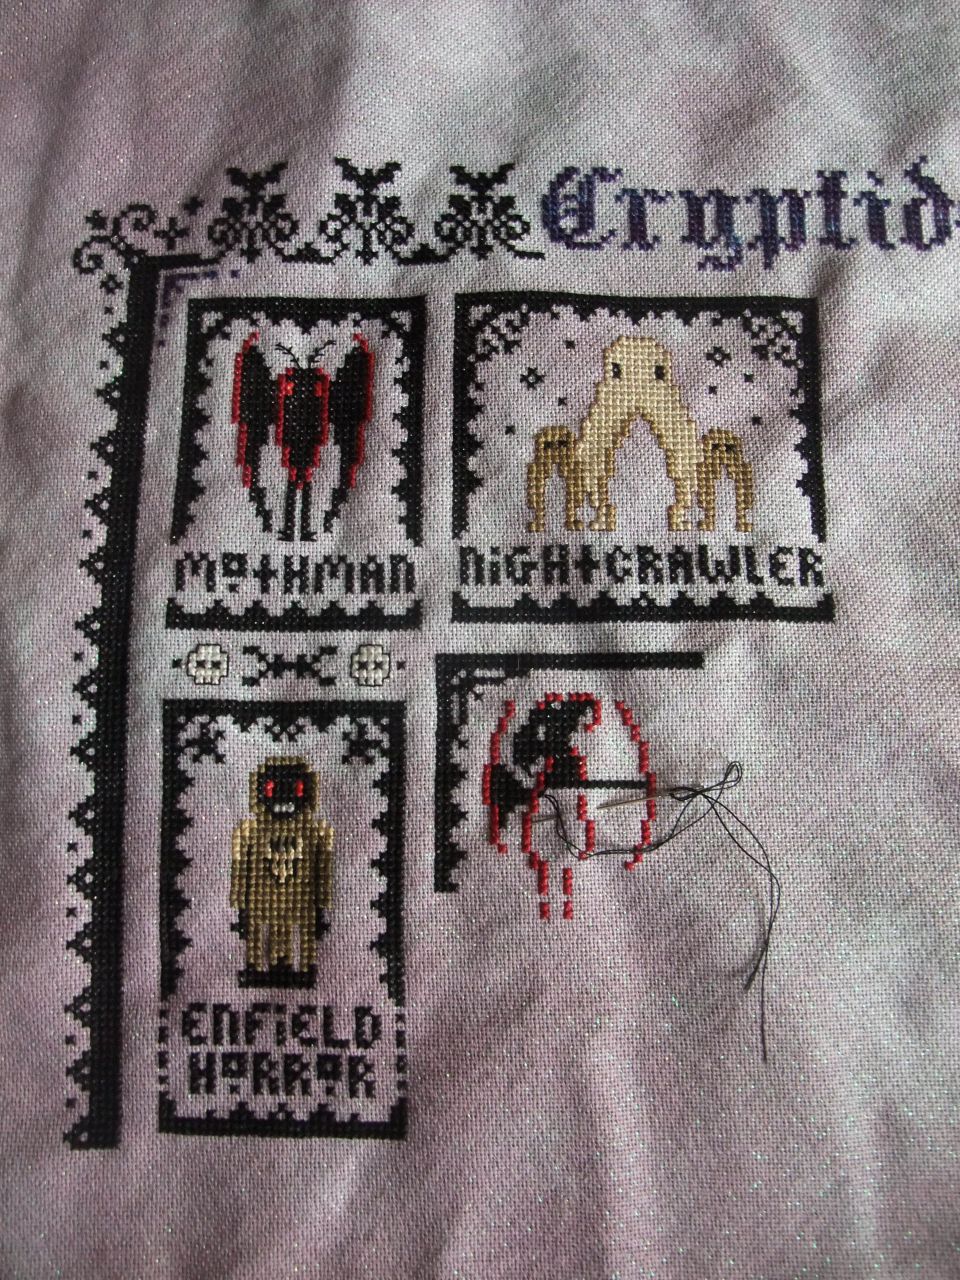 Yea! Patty - it worked!!!! This is the SAL you mentioned. I have not taken a current photo but this is the beginning. I now have 3 more creatures stitched.